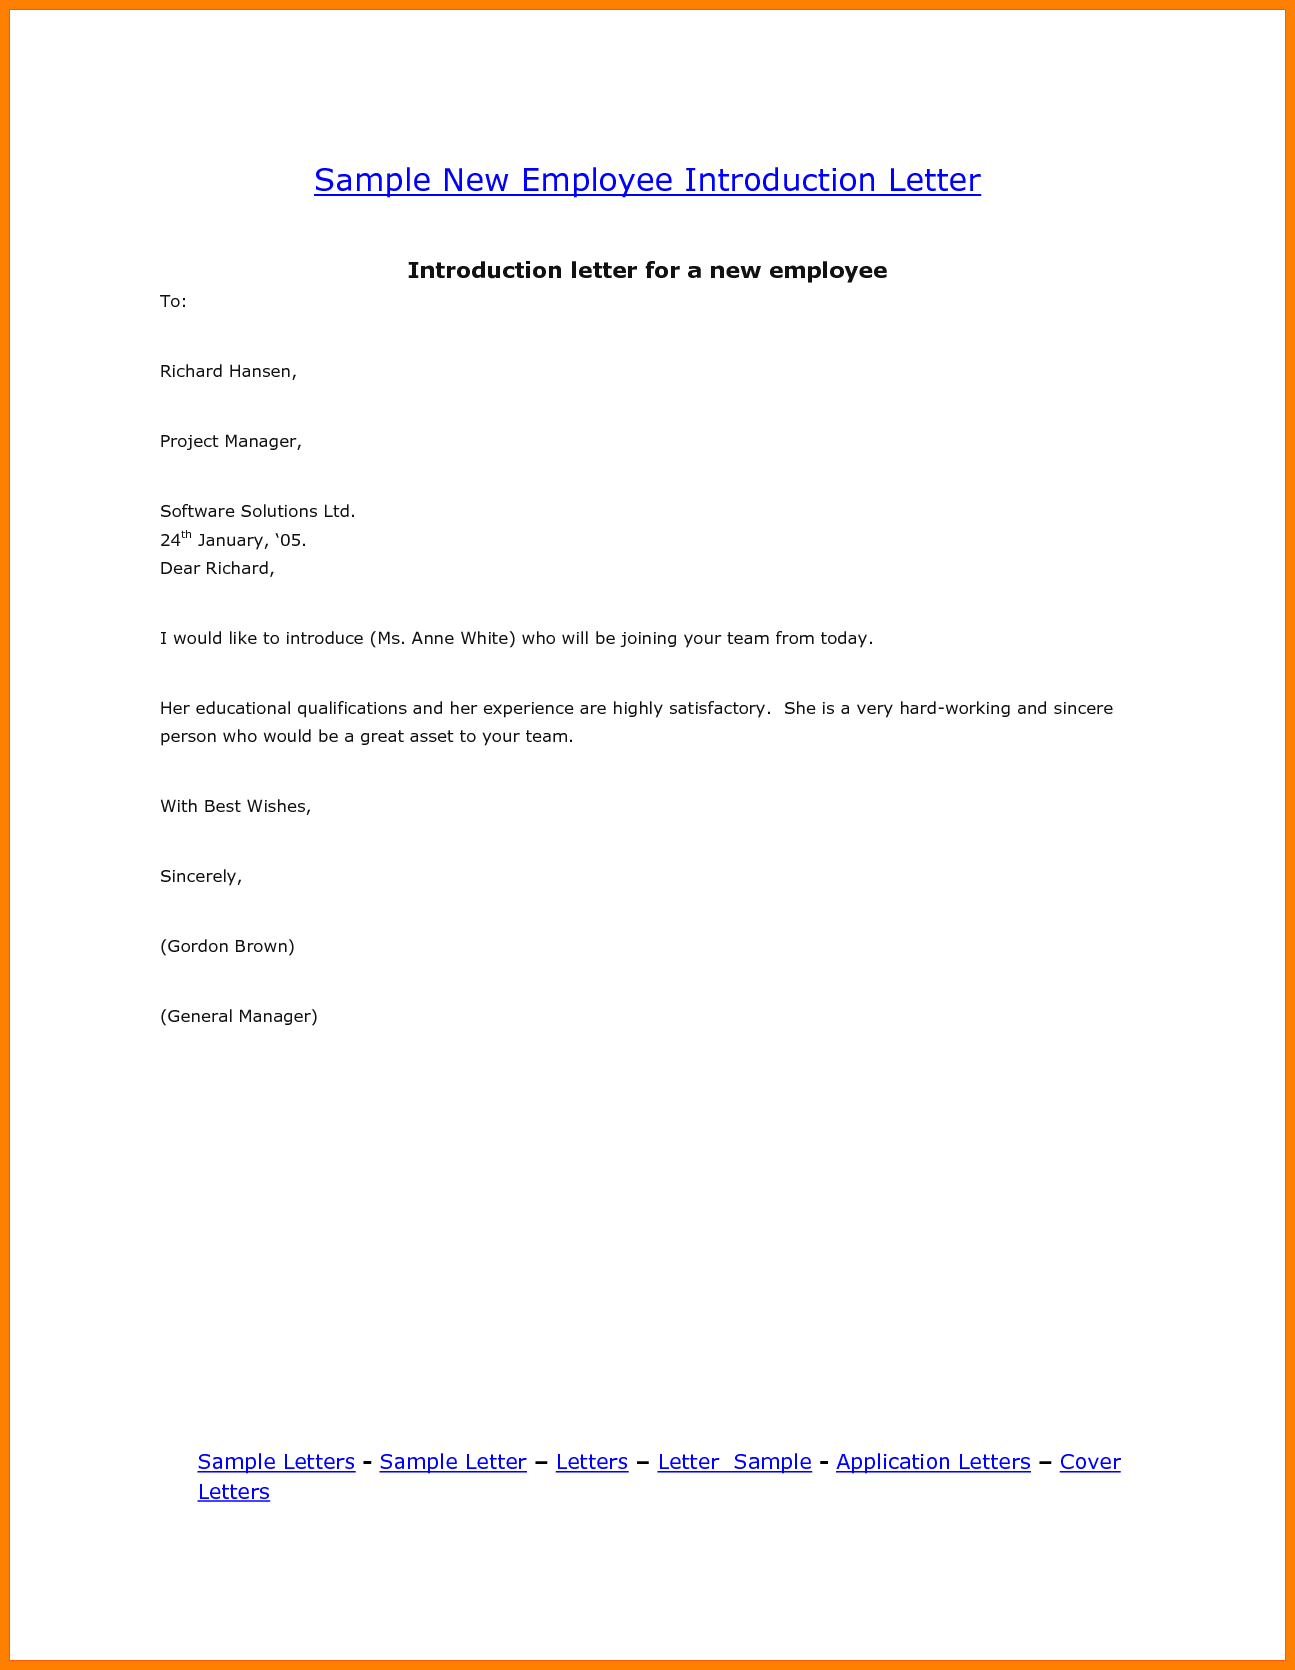 New Employee Introduction Template